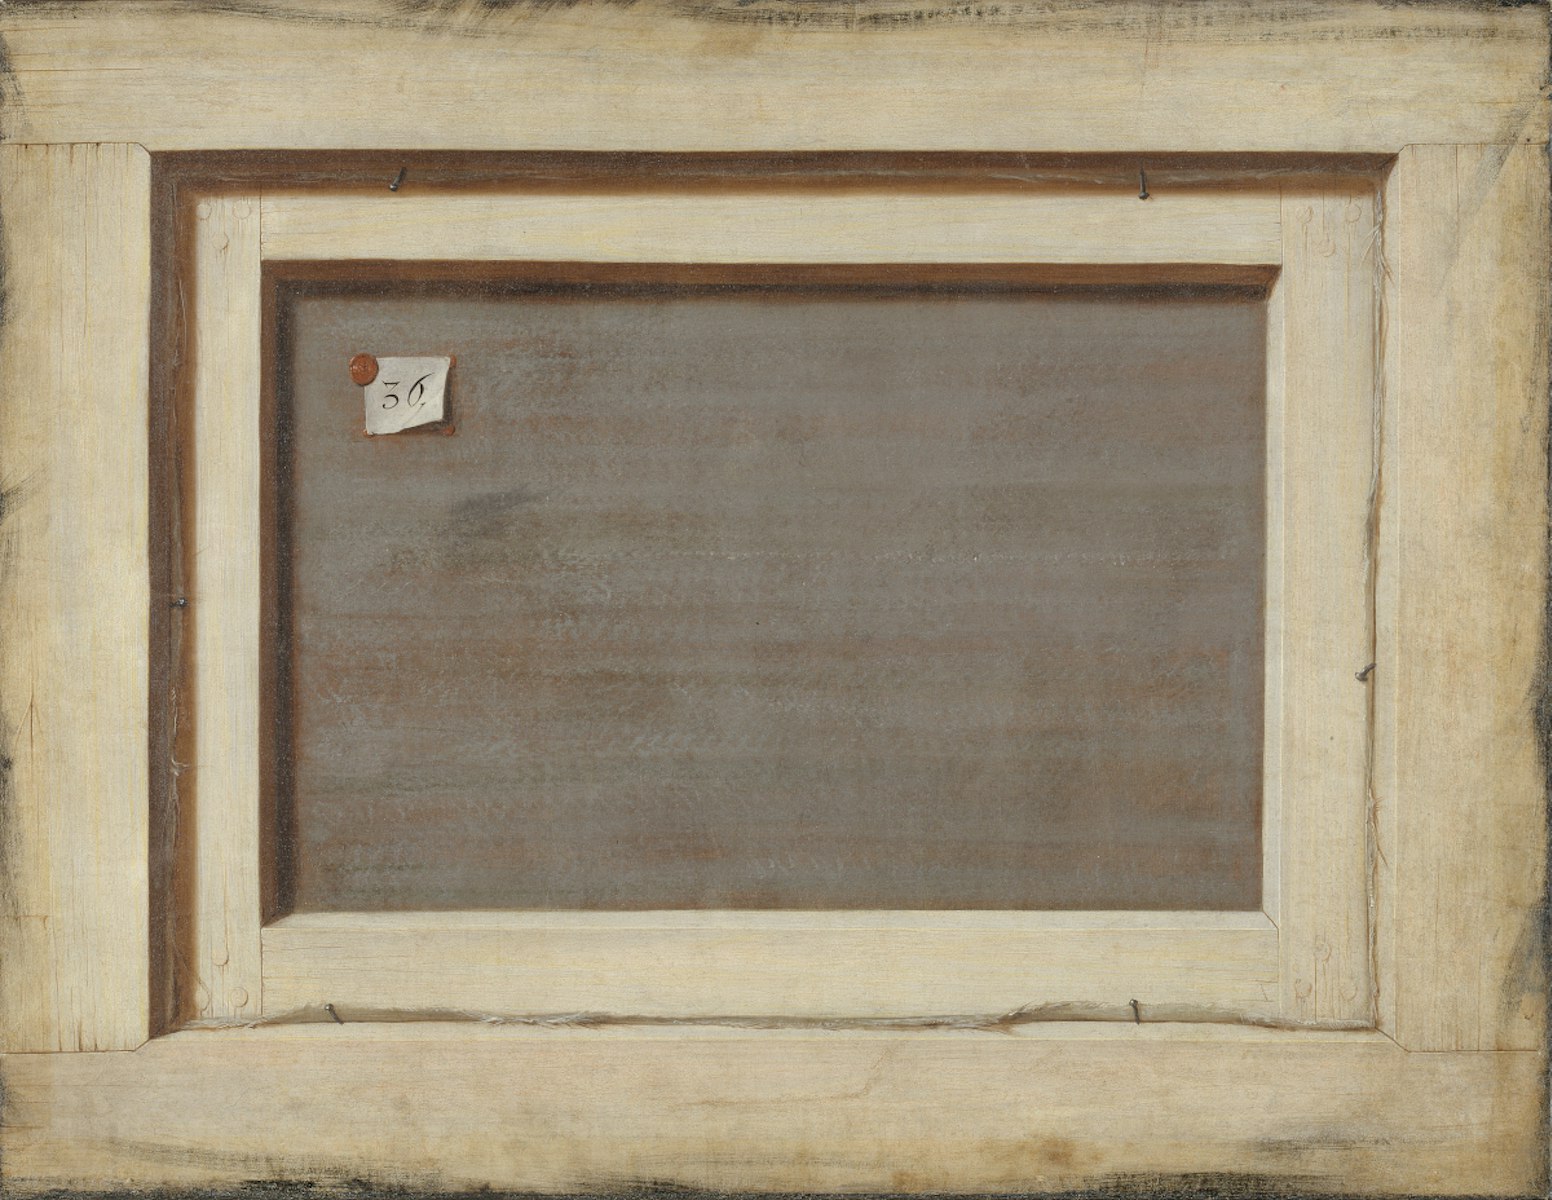 https://the-public-domain-review.imgix.net/shop/reverse-of-a-framed-painting.jpg?h=1200